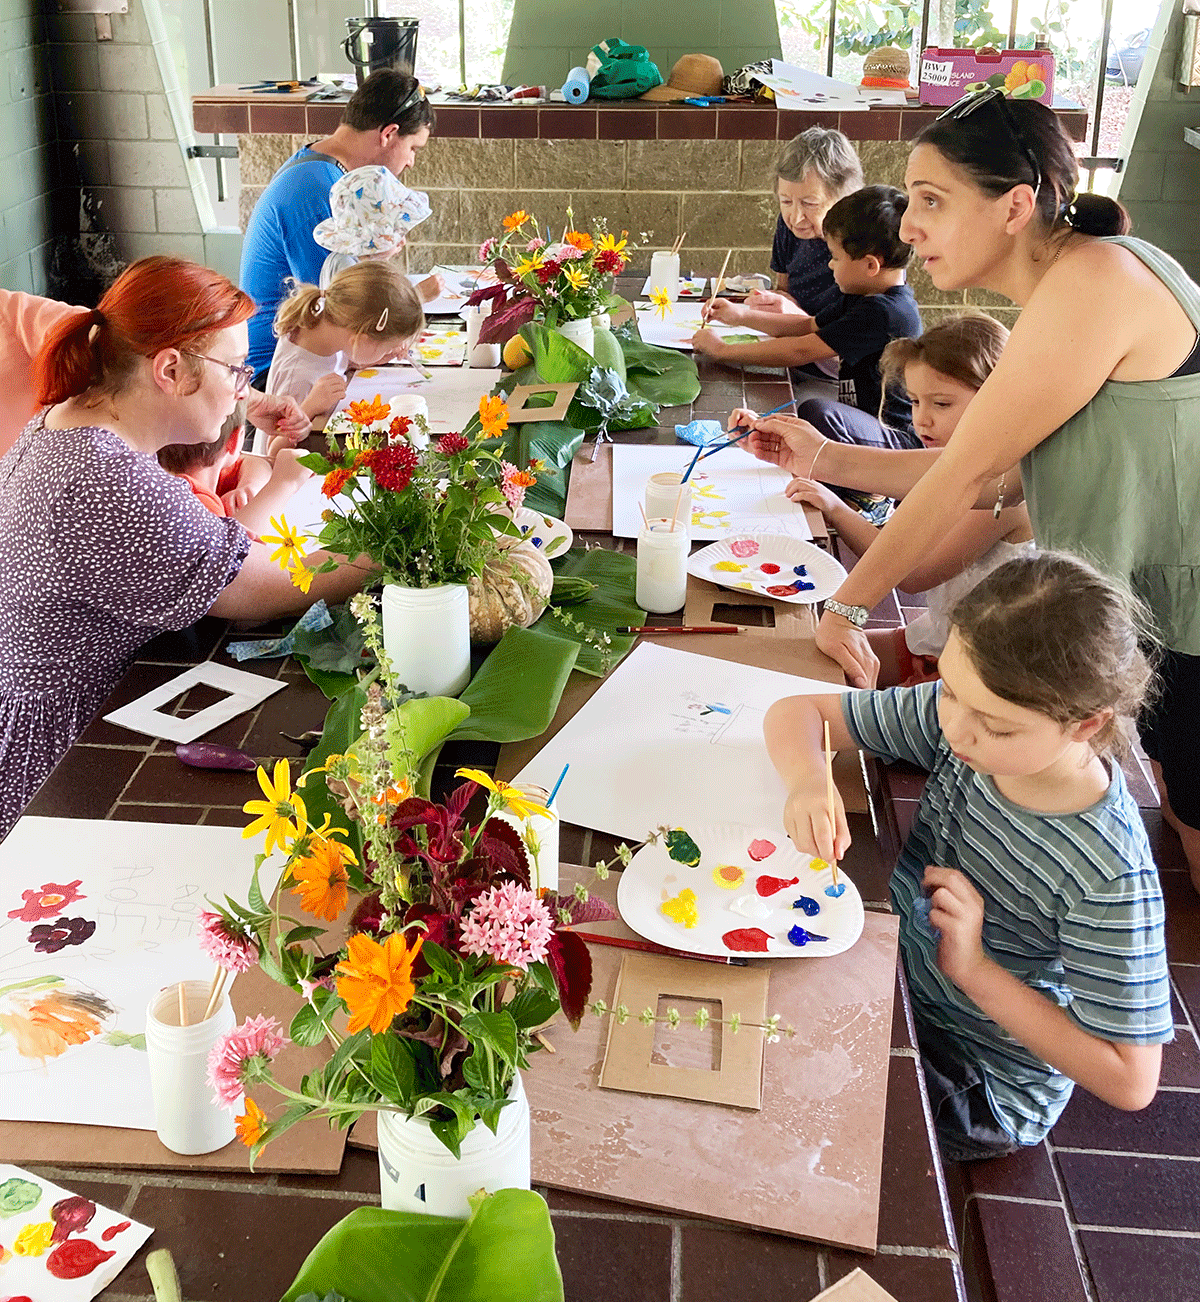 Children and parents painting at large table with vases of flowers as inspiration